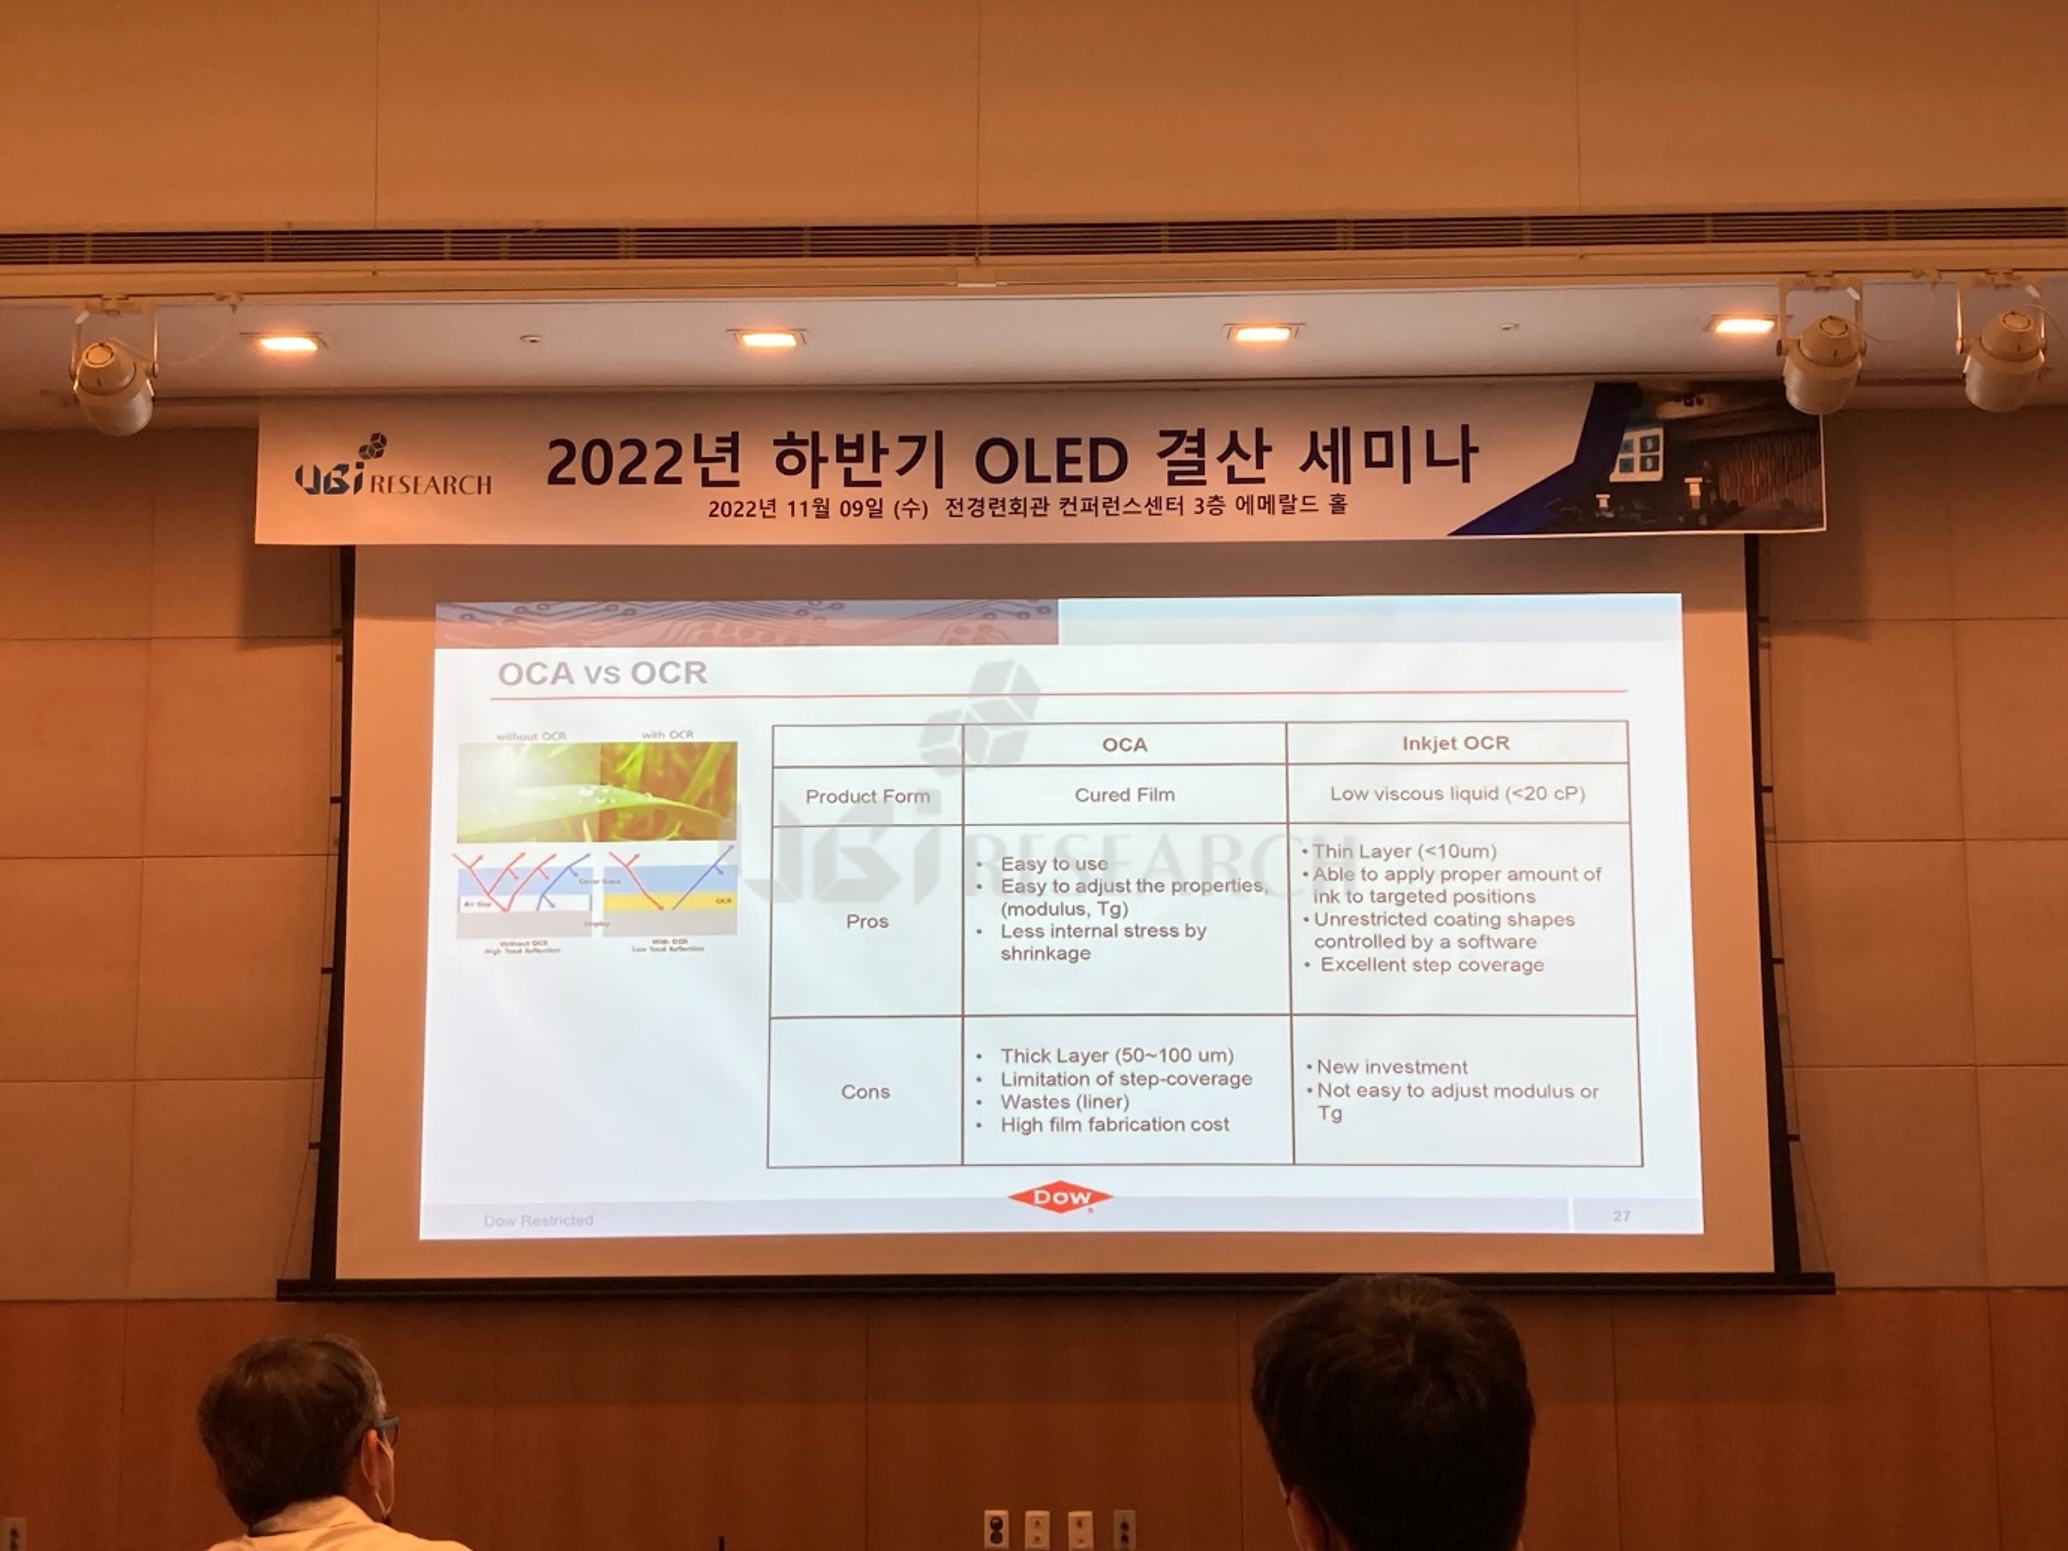 DOW Chemical, Inkjet OCR for Foldable OLEDs (Second half of 2022 OLED Seminar)